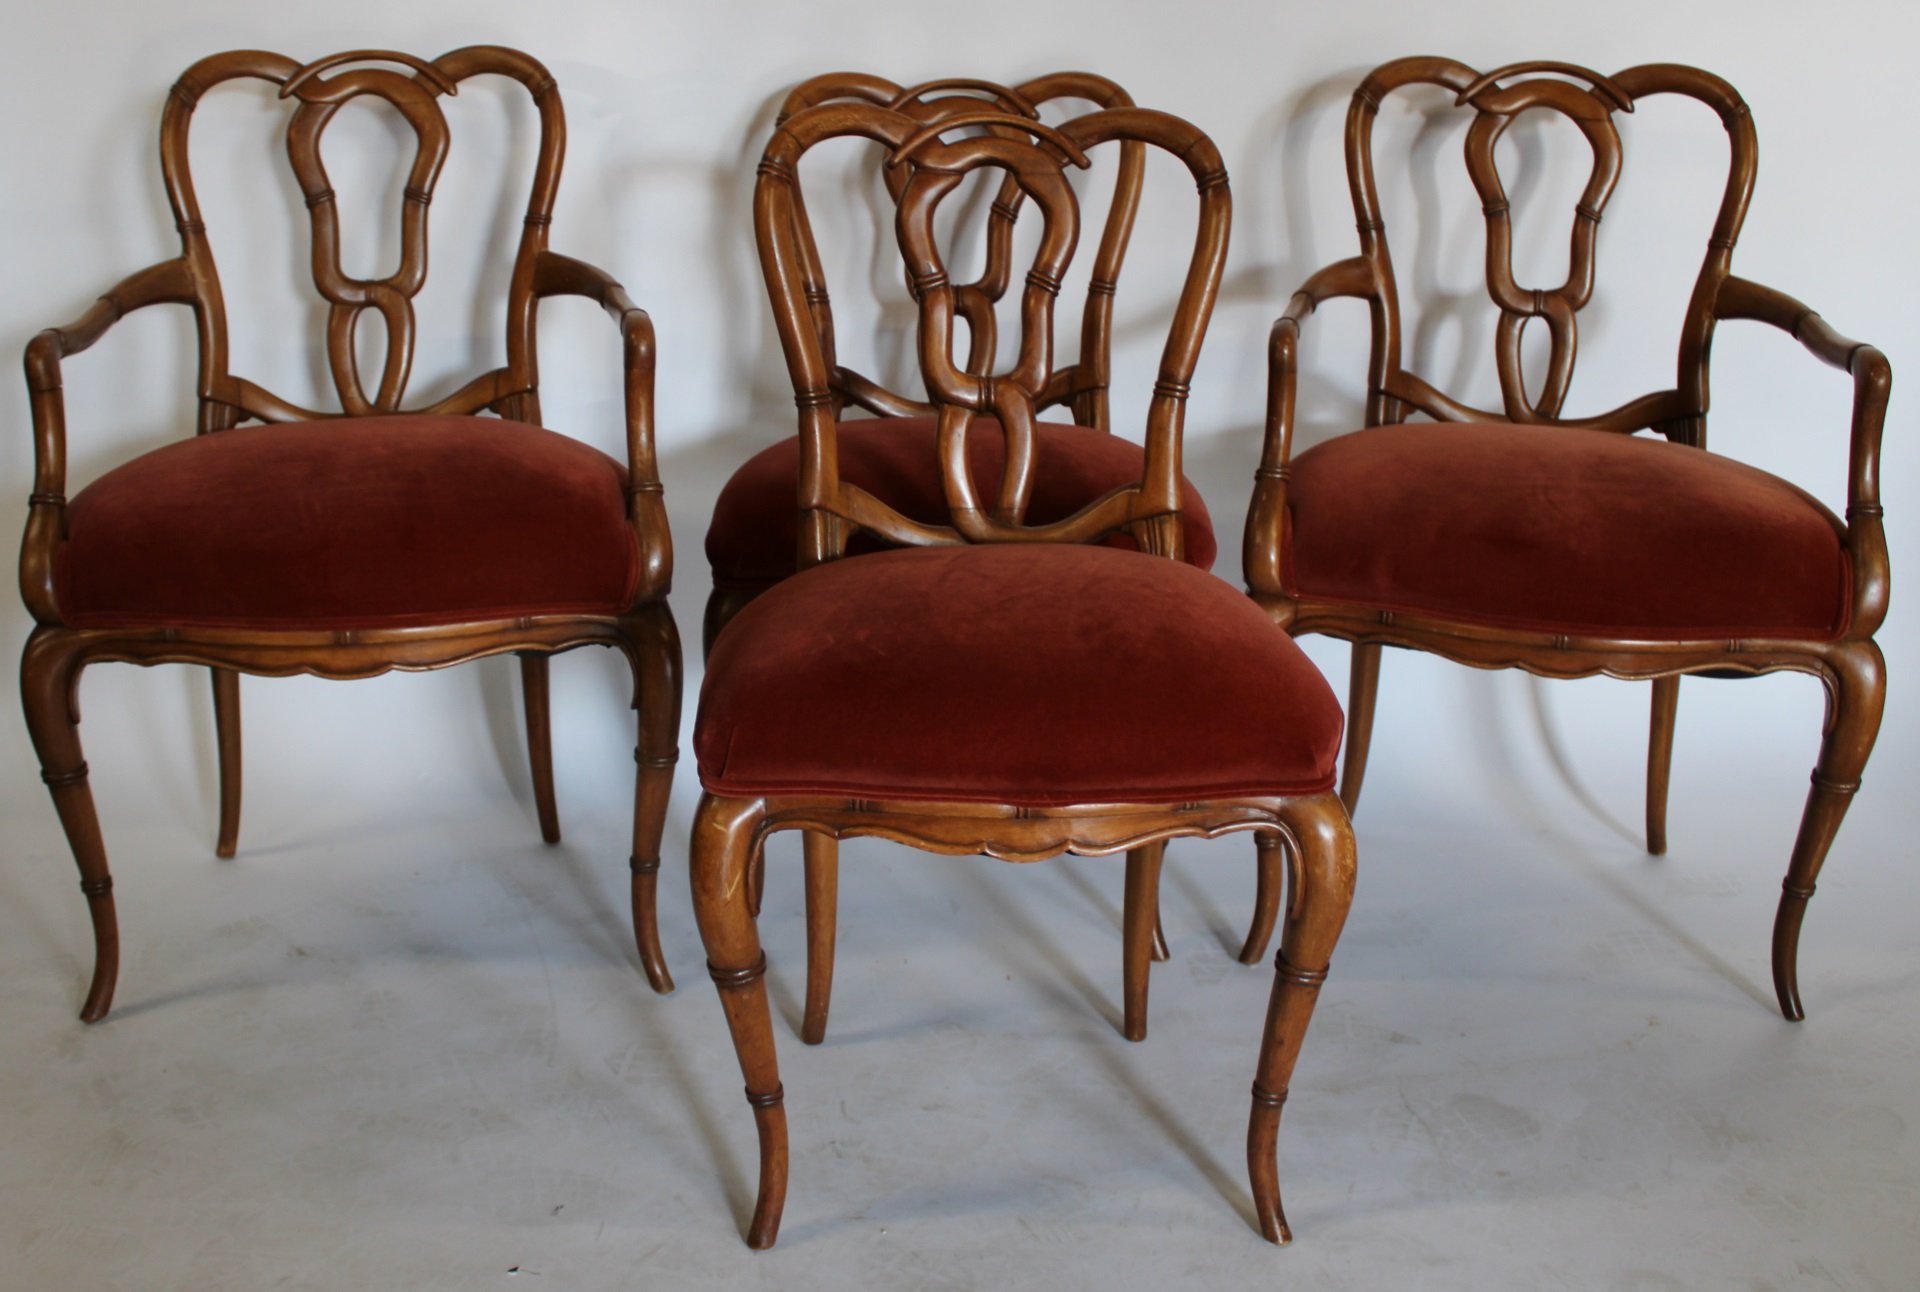 4 REGENCY STYLE BAMBOO FORM CHAIRS 3bc4c1